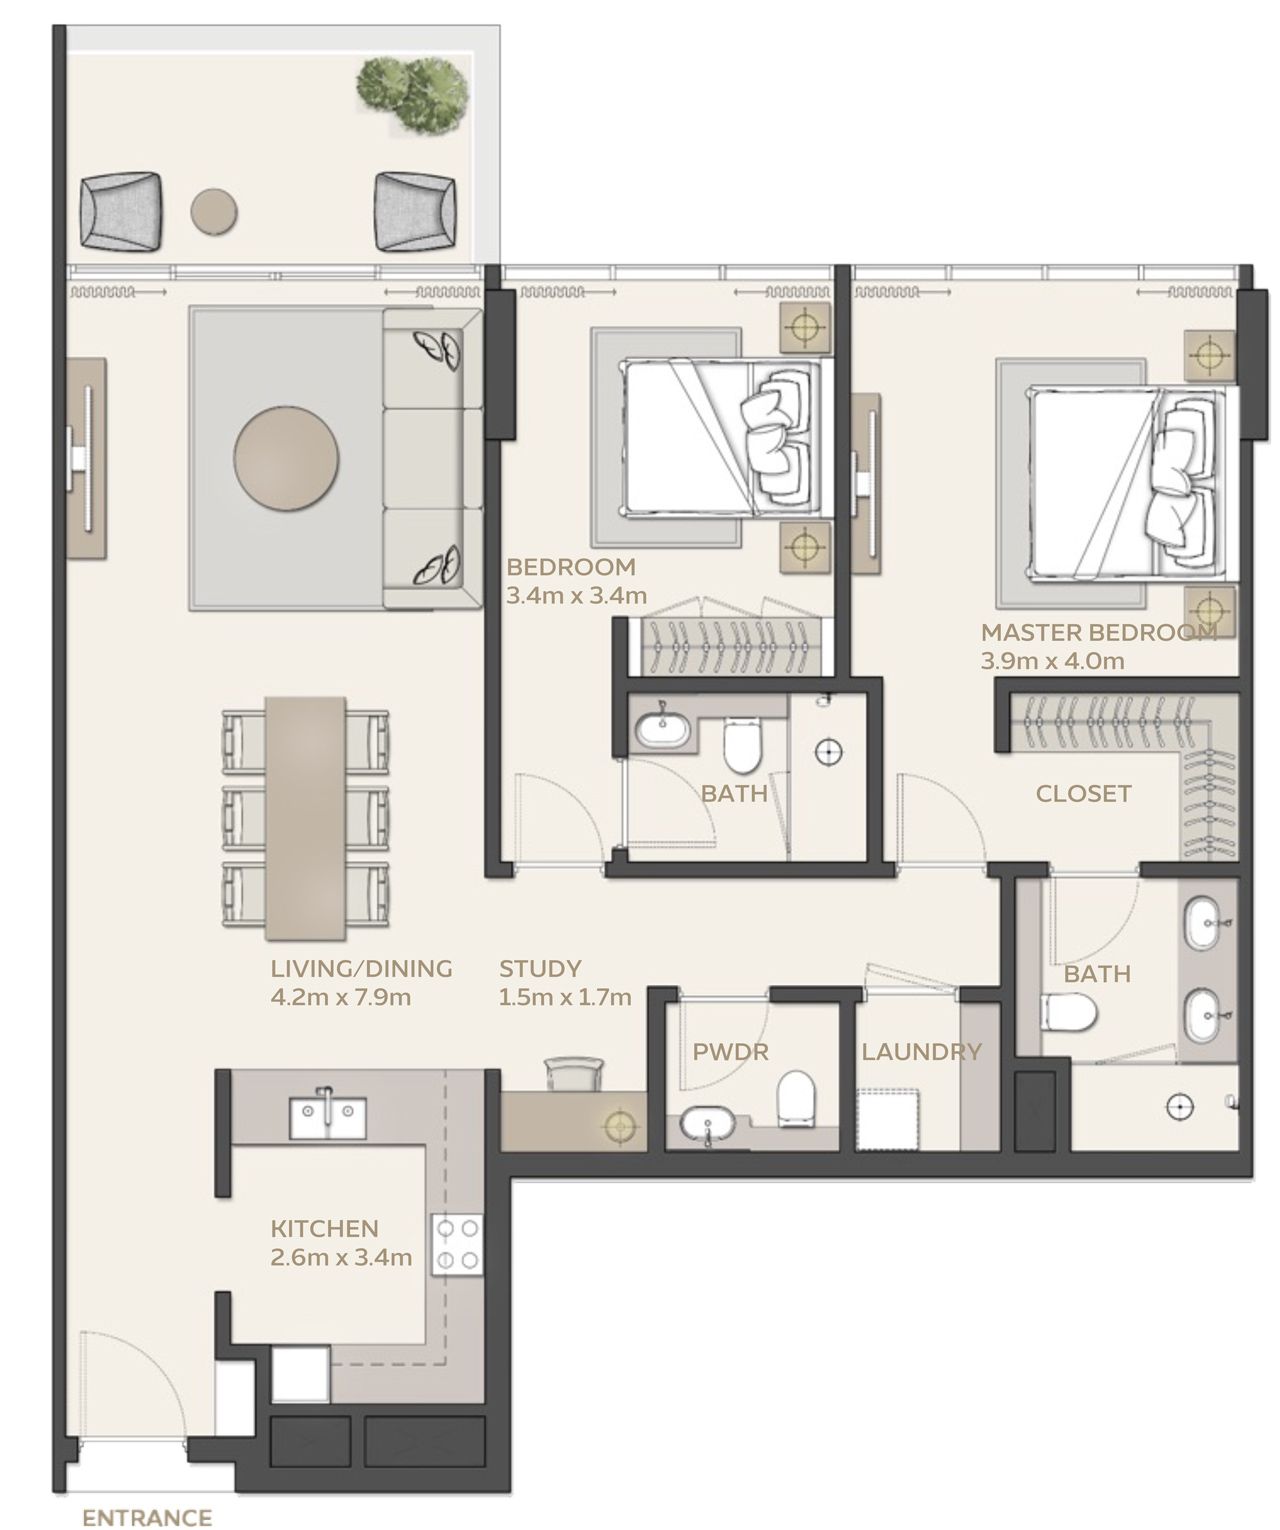 Mangrove Residences At Expo City 2 bedrooms floor plan